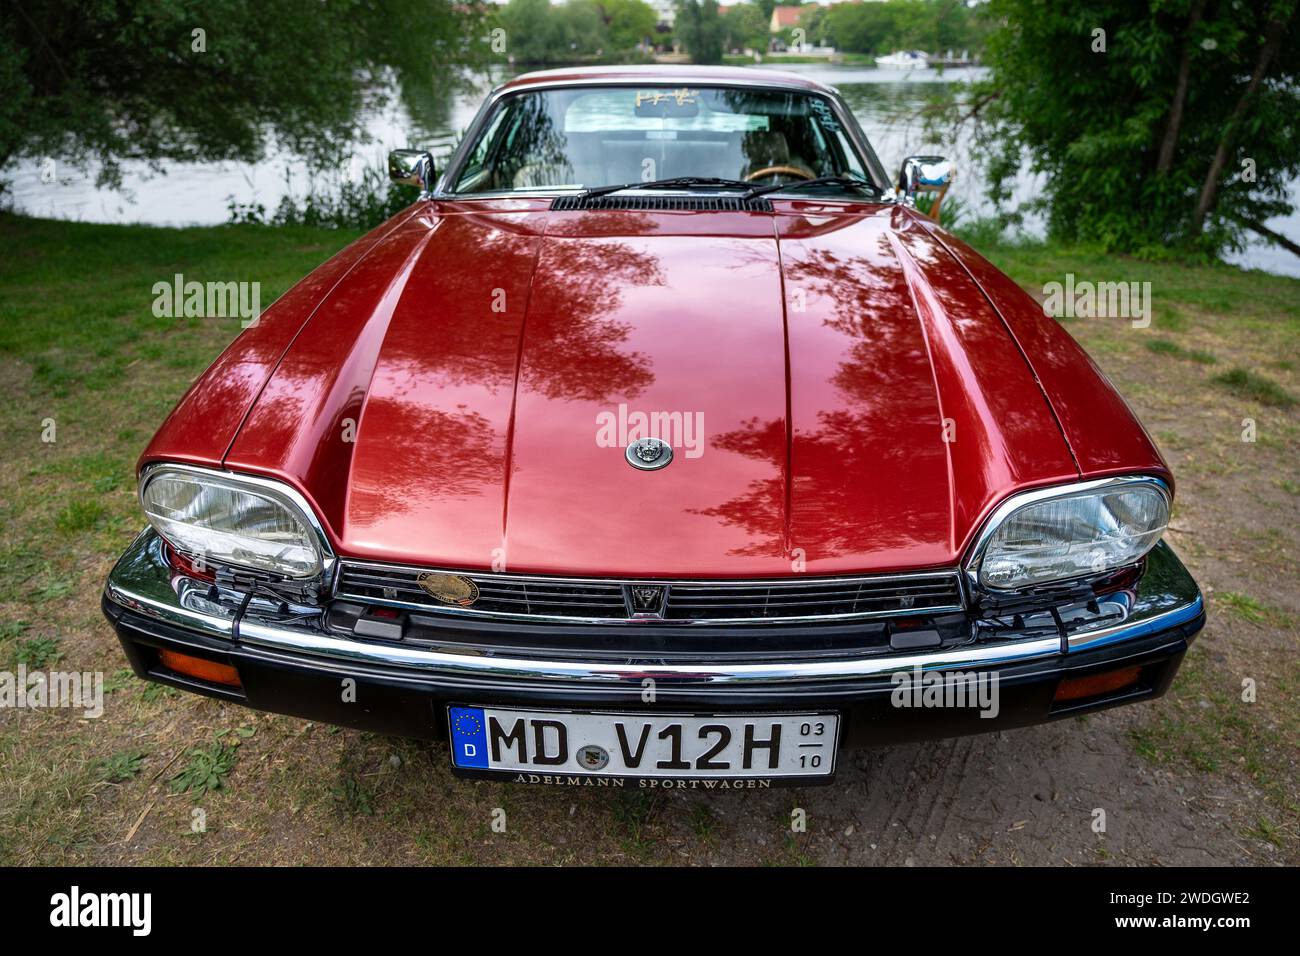 WERDER (HAVEL), GERMANY - MAY 20, 2023: The luxury grand tourer car Jaguar XJS HE, 1984. Oldtimer - Festival Werder Classics 2023 Stock Photo